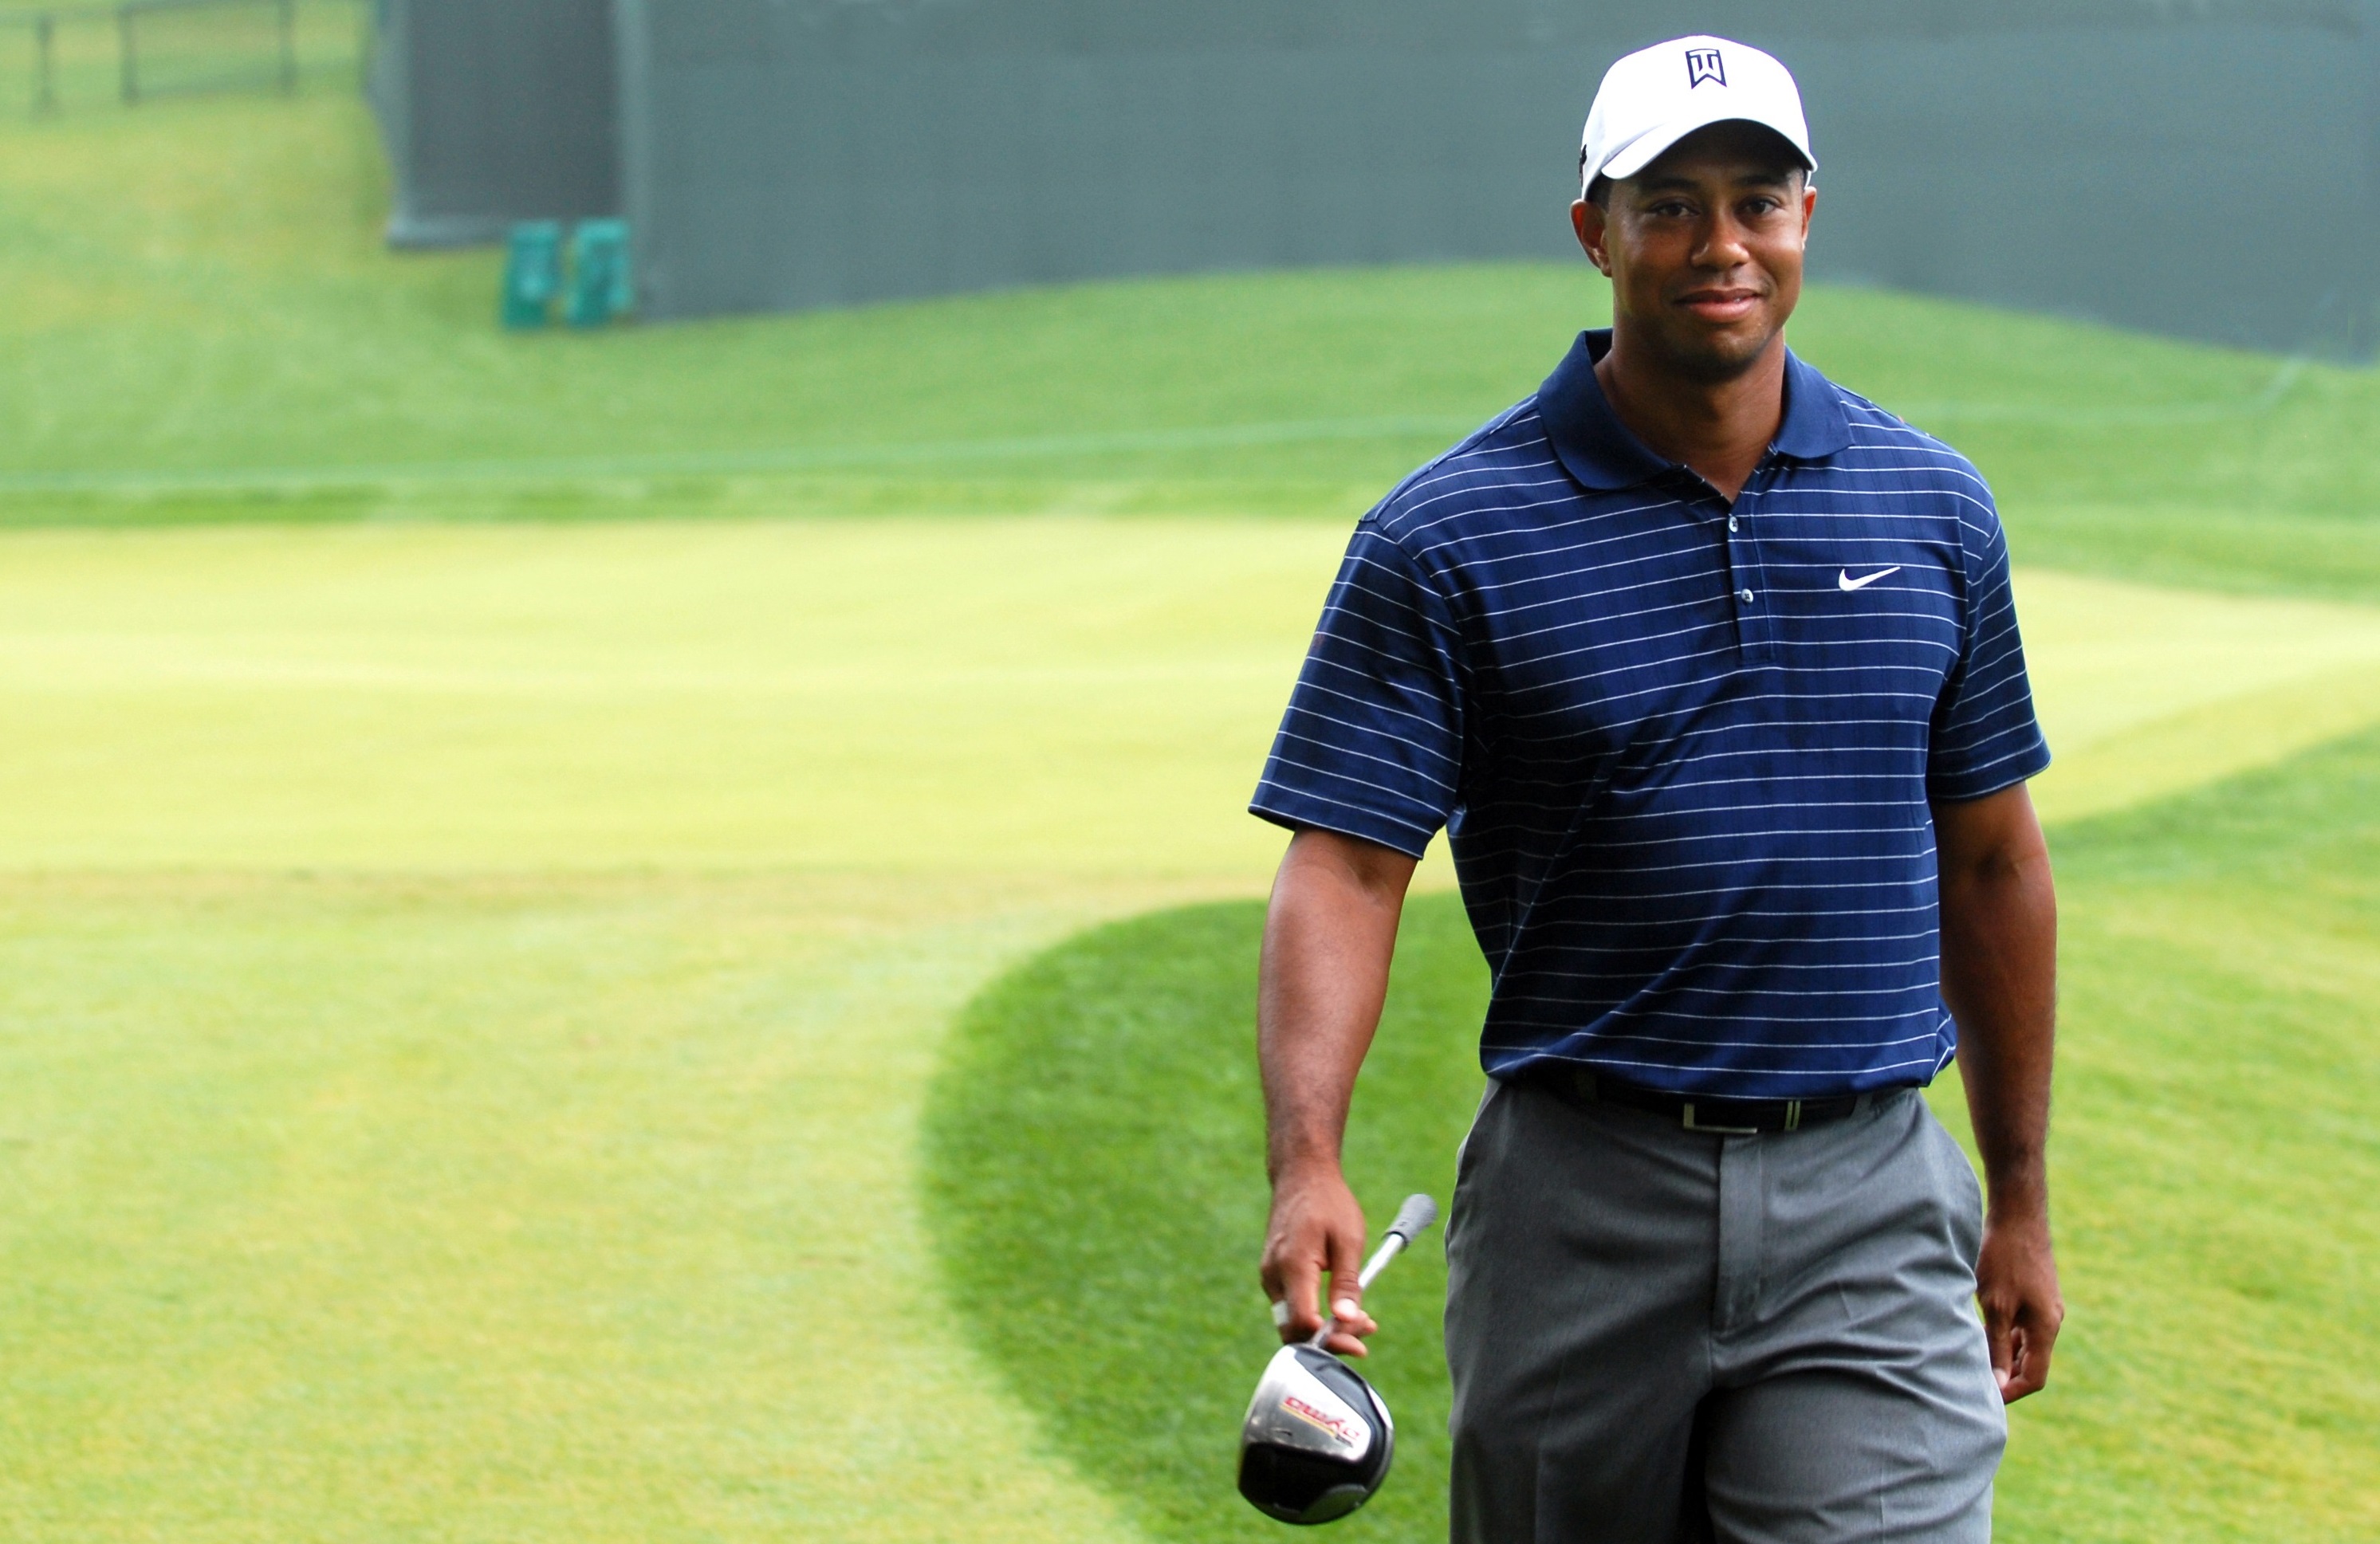 Eldrick Tont "Tiger" Woods is an American professional golfer by 12019